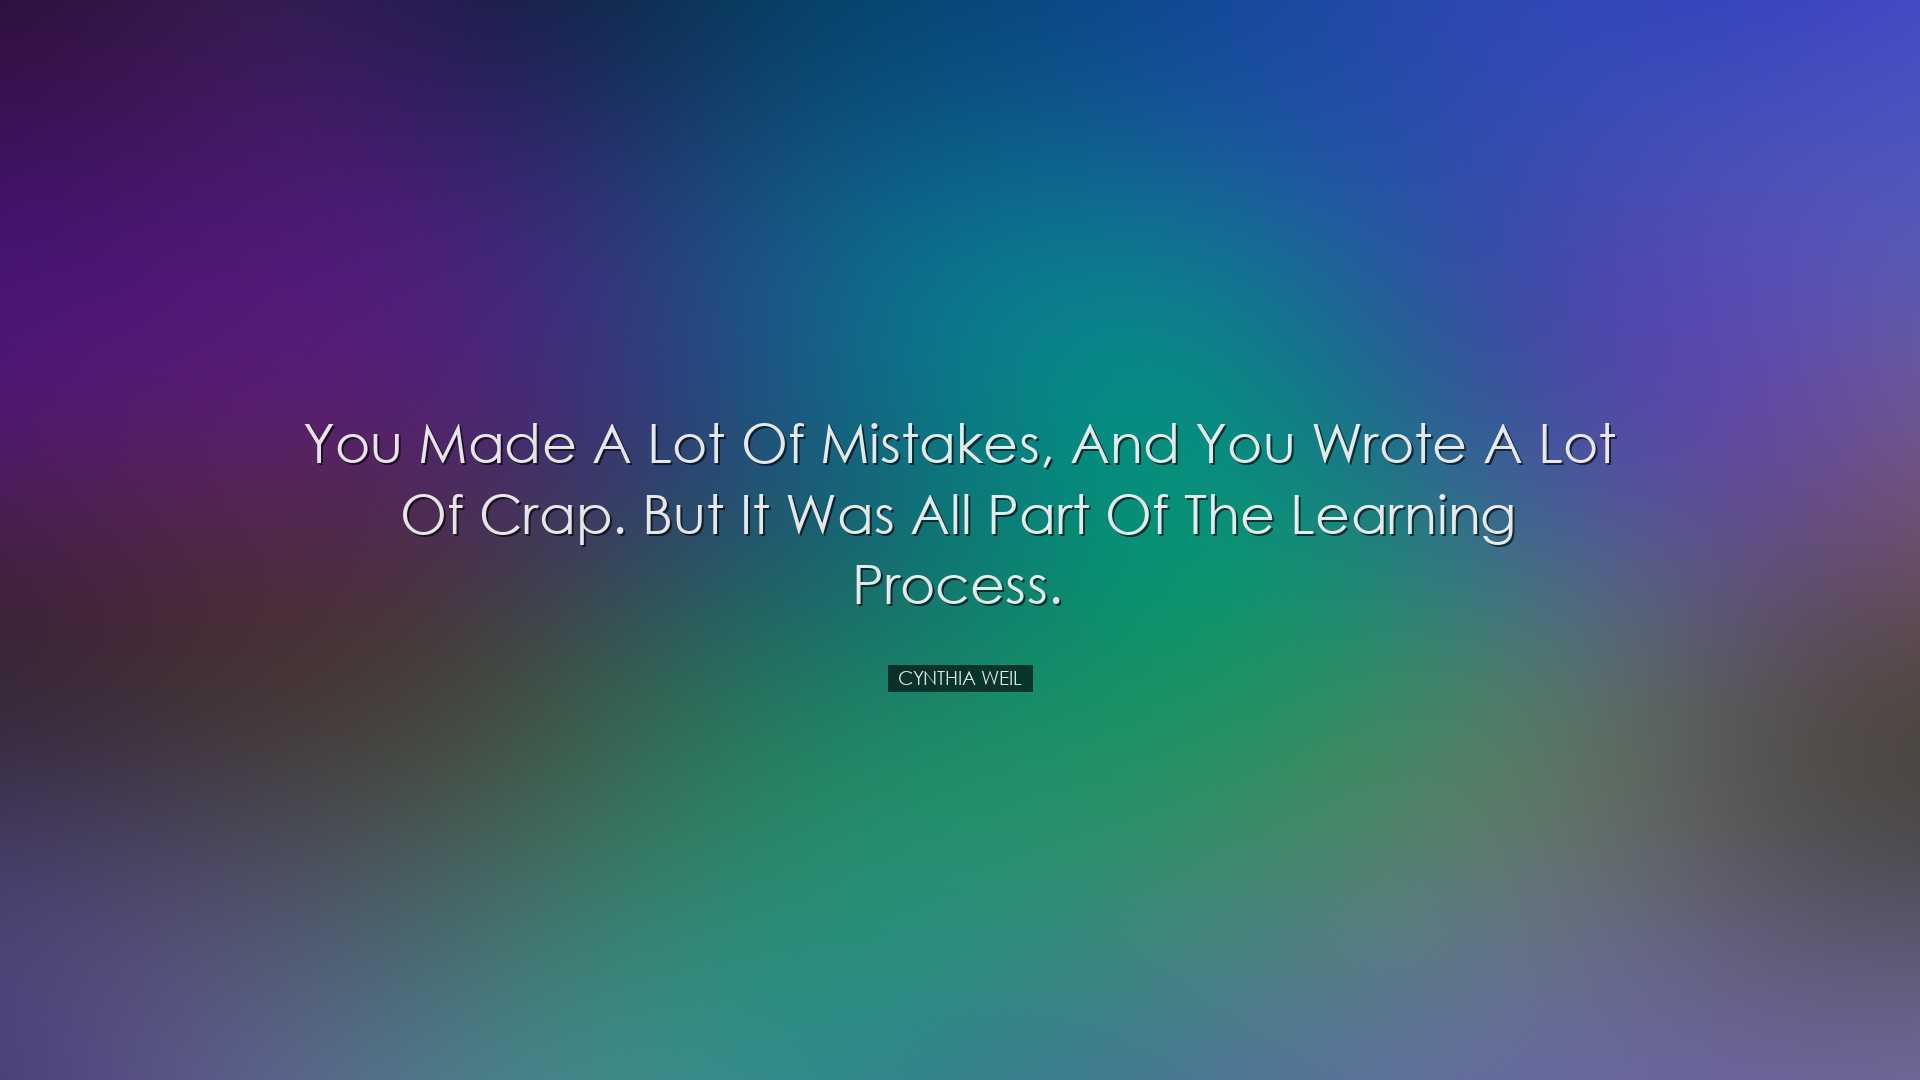 You made a lot of mistakes, and you wrote a lot of crap. But it wa